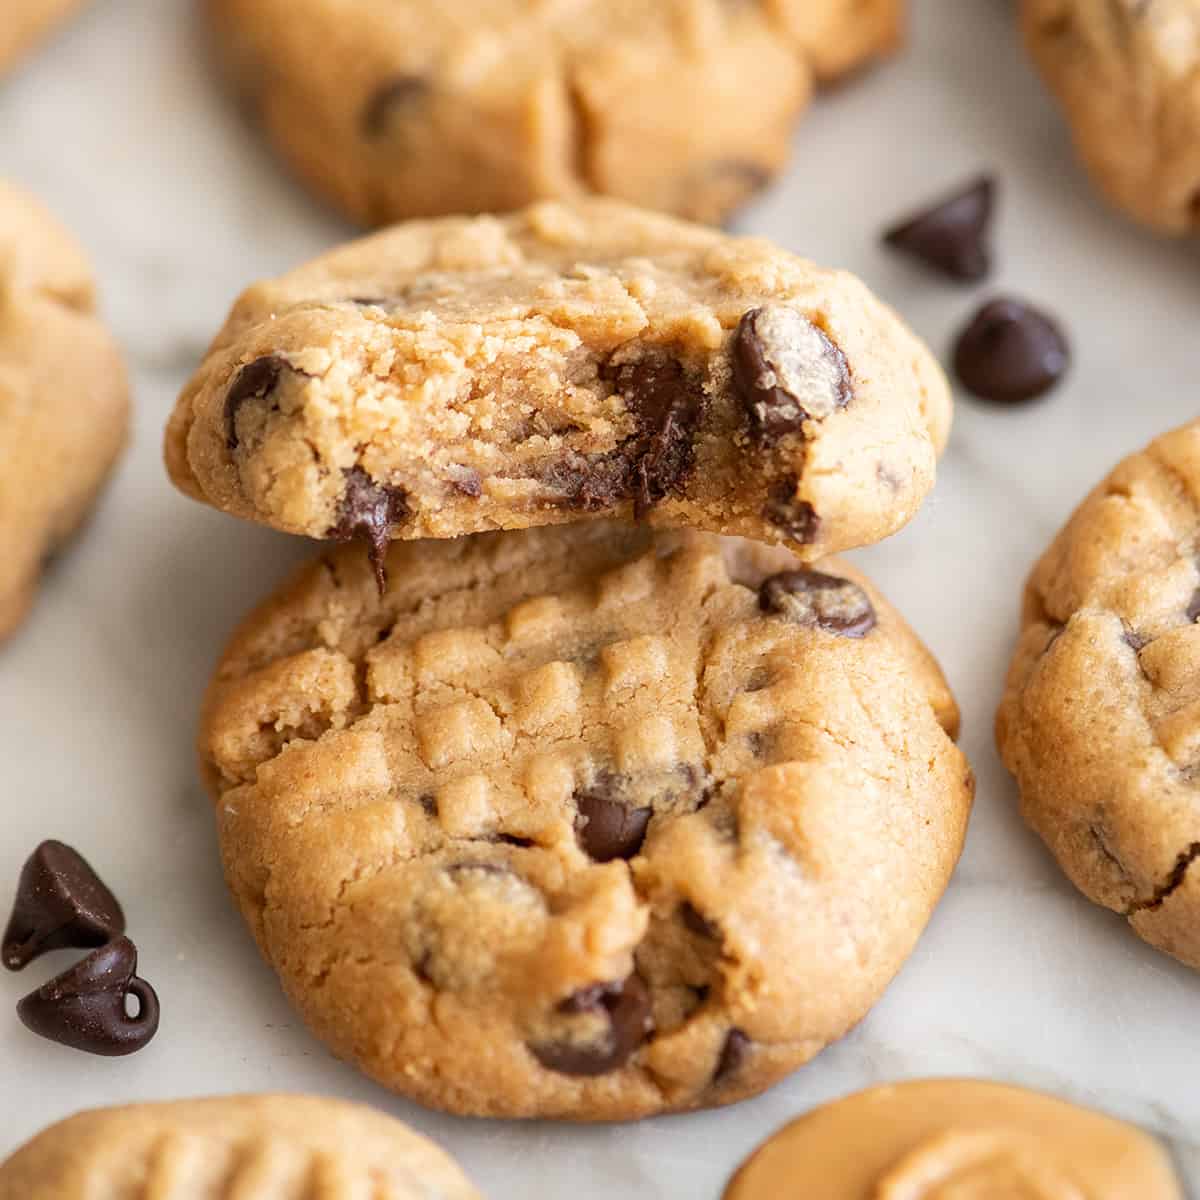 two Peanut Butter Chocolate Chip Cookies, one with a bite taken out of it 